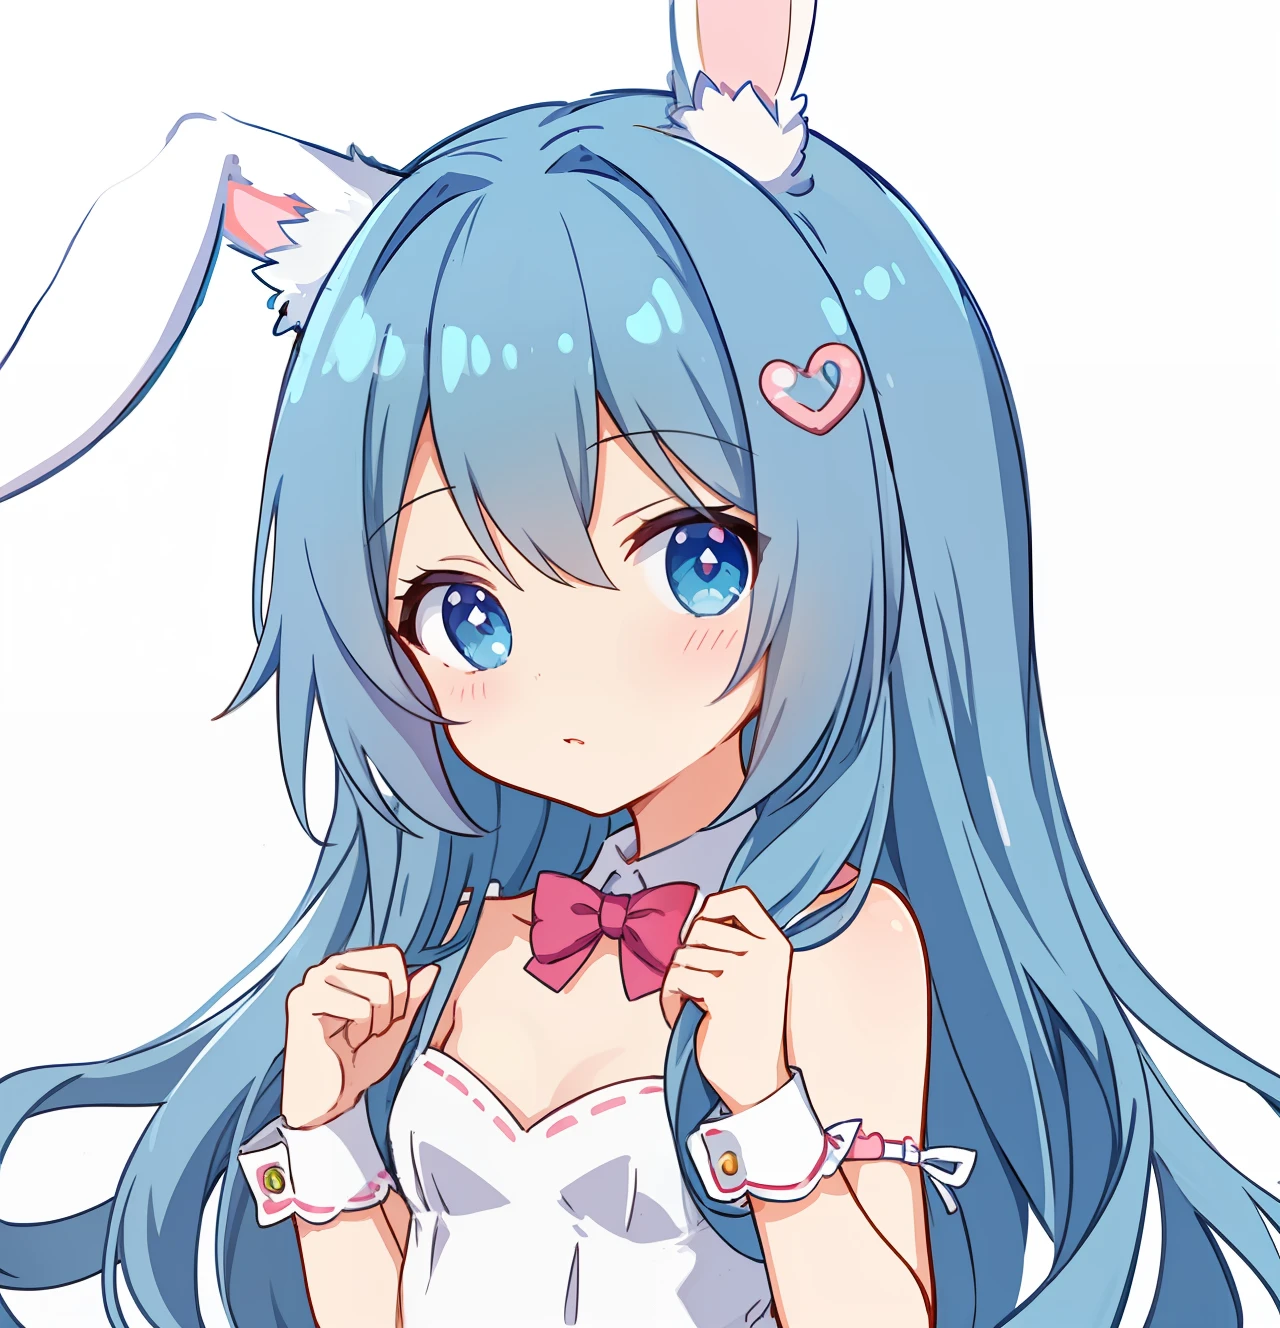 Draw a girl in a dress with a rabbit tail and rabbit ears, Cute anime dog girl, Bunny Girl, Anime Bunny Girl, Cute!! tchibi!!! Bunny Girl, Bunny Girl, thick lineart, nekomimi, Blue Rabbit, DDLC, small curvaceous , linear art, Simple lines of art, flat anime style shading, holding a pudica pose